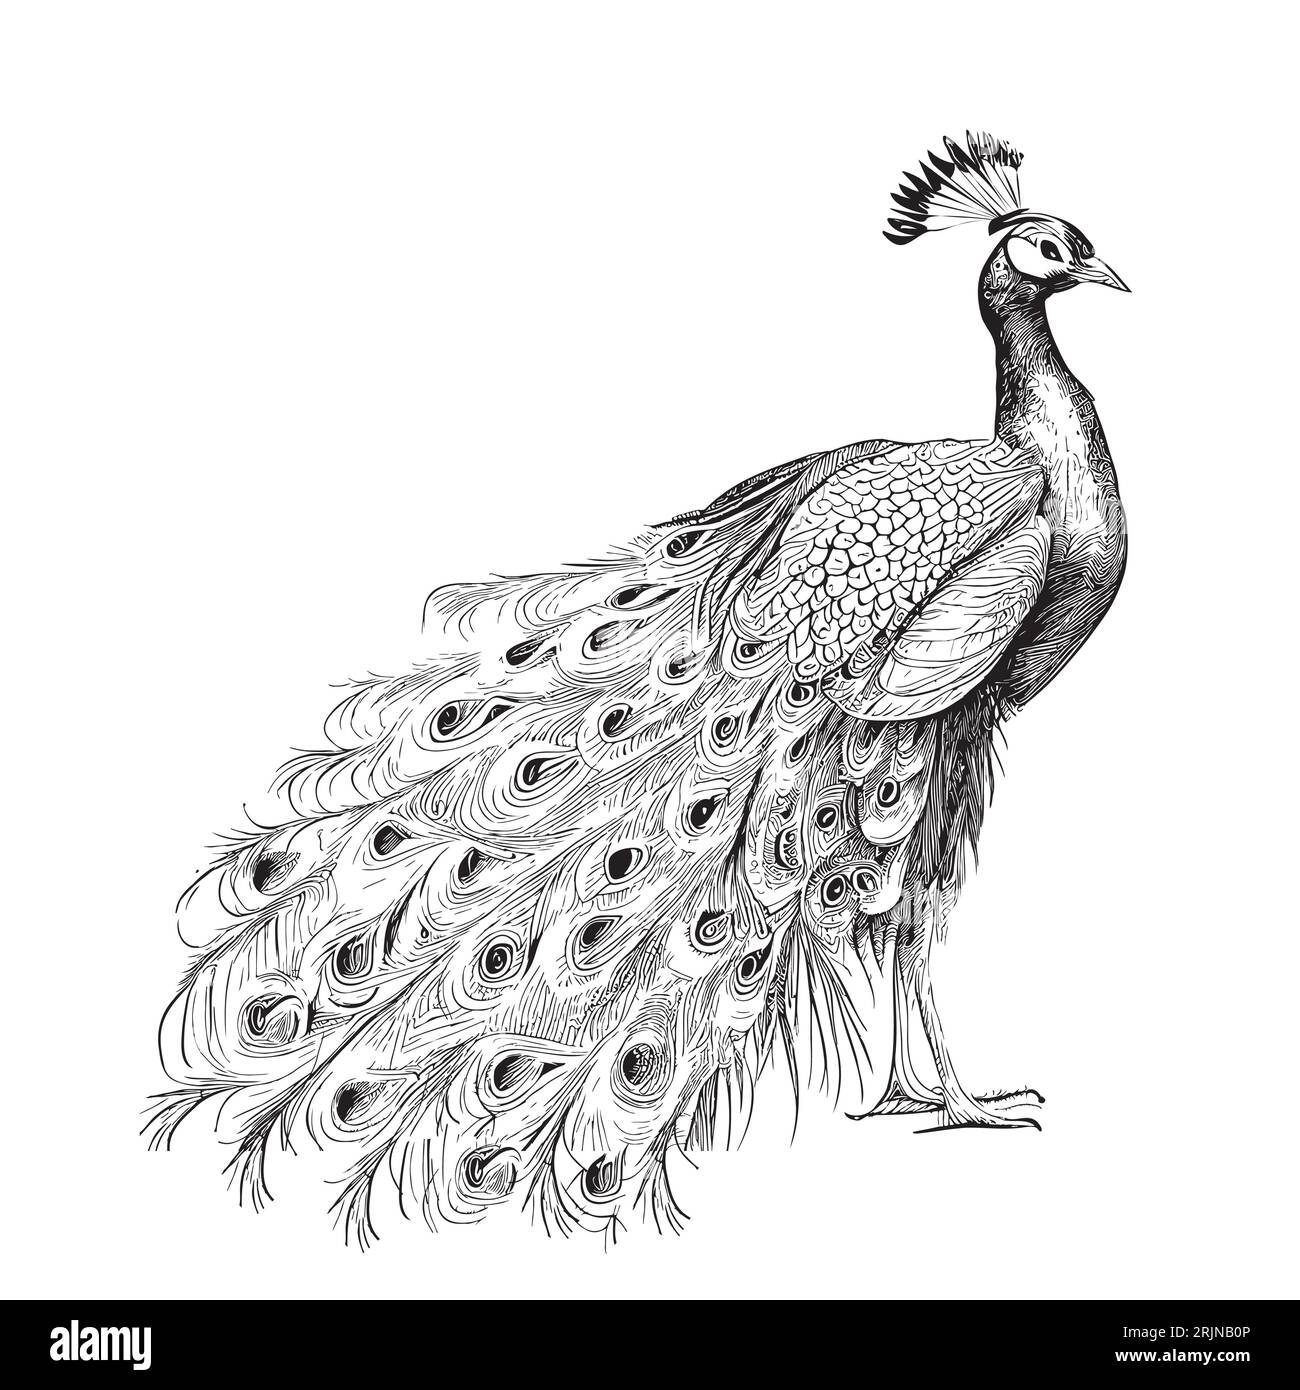 Learn How To Draw a Peacock - YouTube